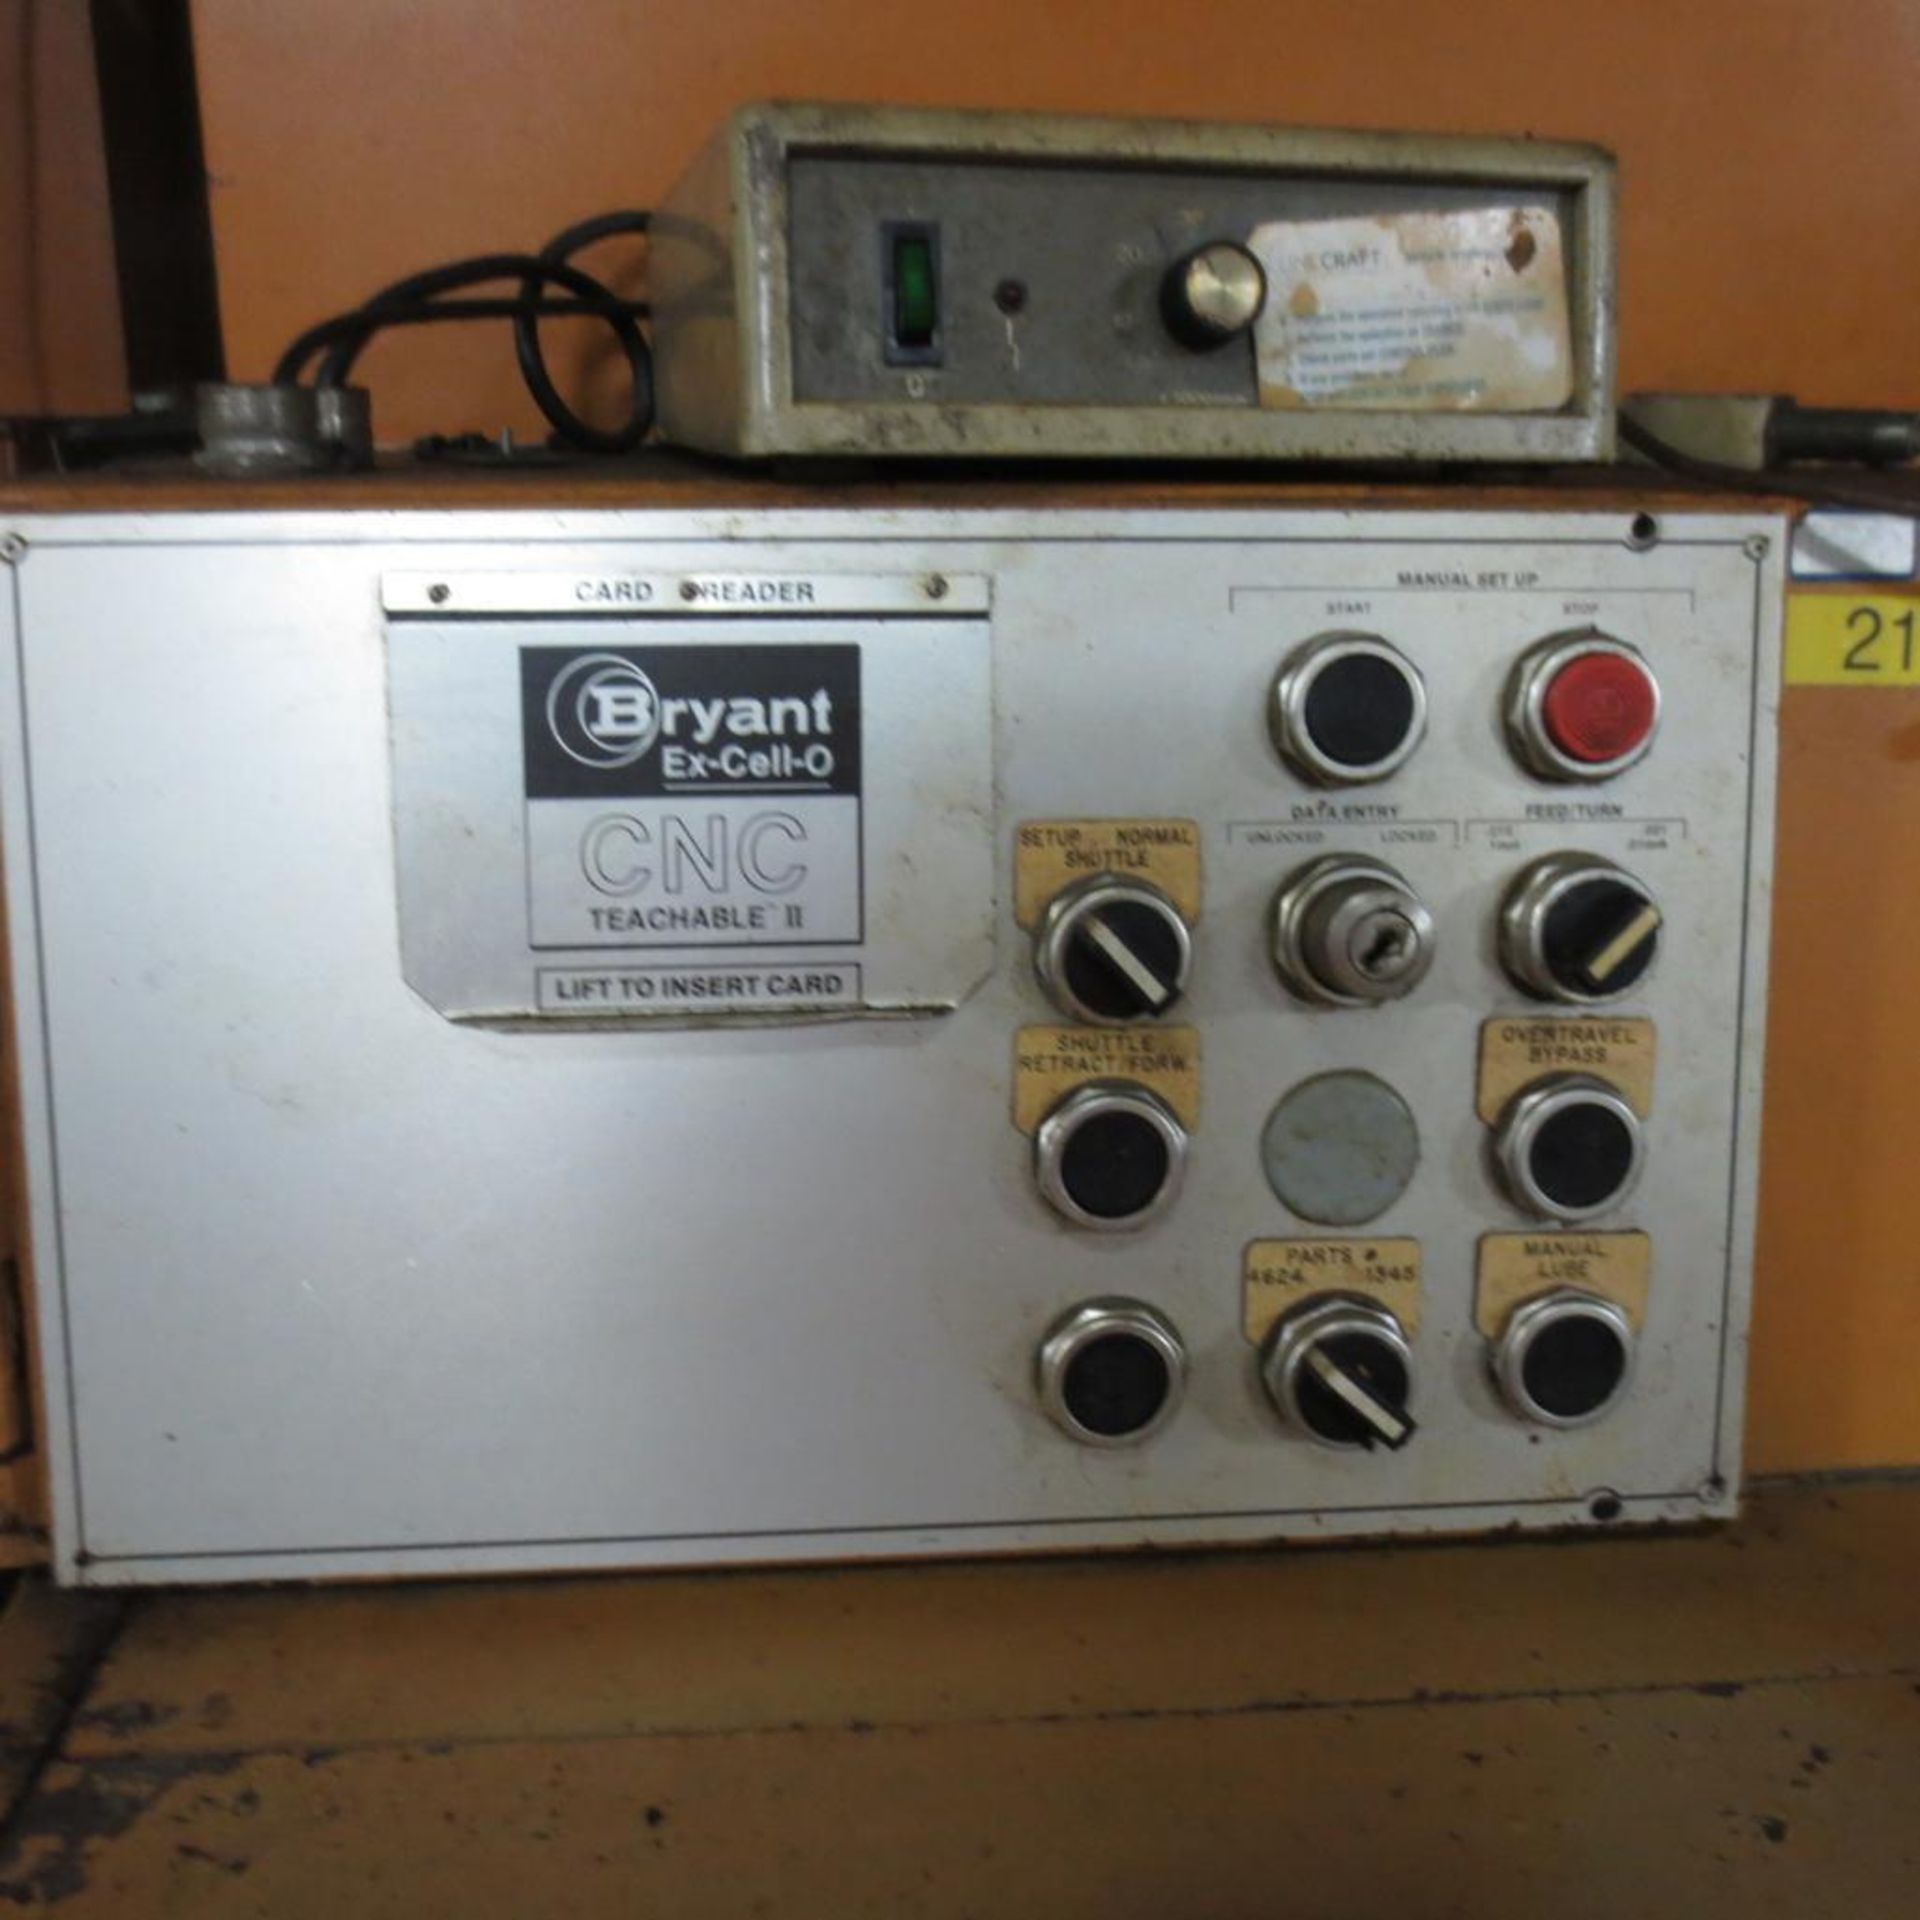 Bryant EX-Cell-0 LL1-10 CNC Grinder, S/N W-16893. Loading Fee is $350.00 - Image 3 of 8